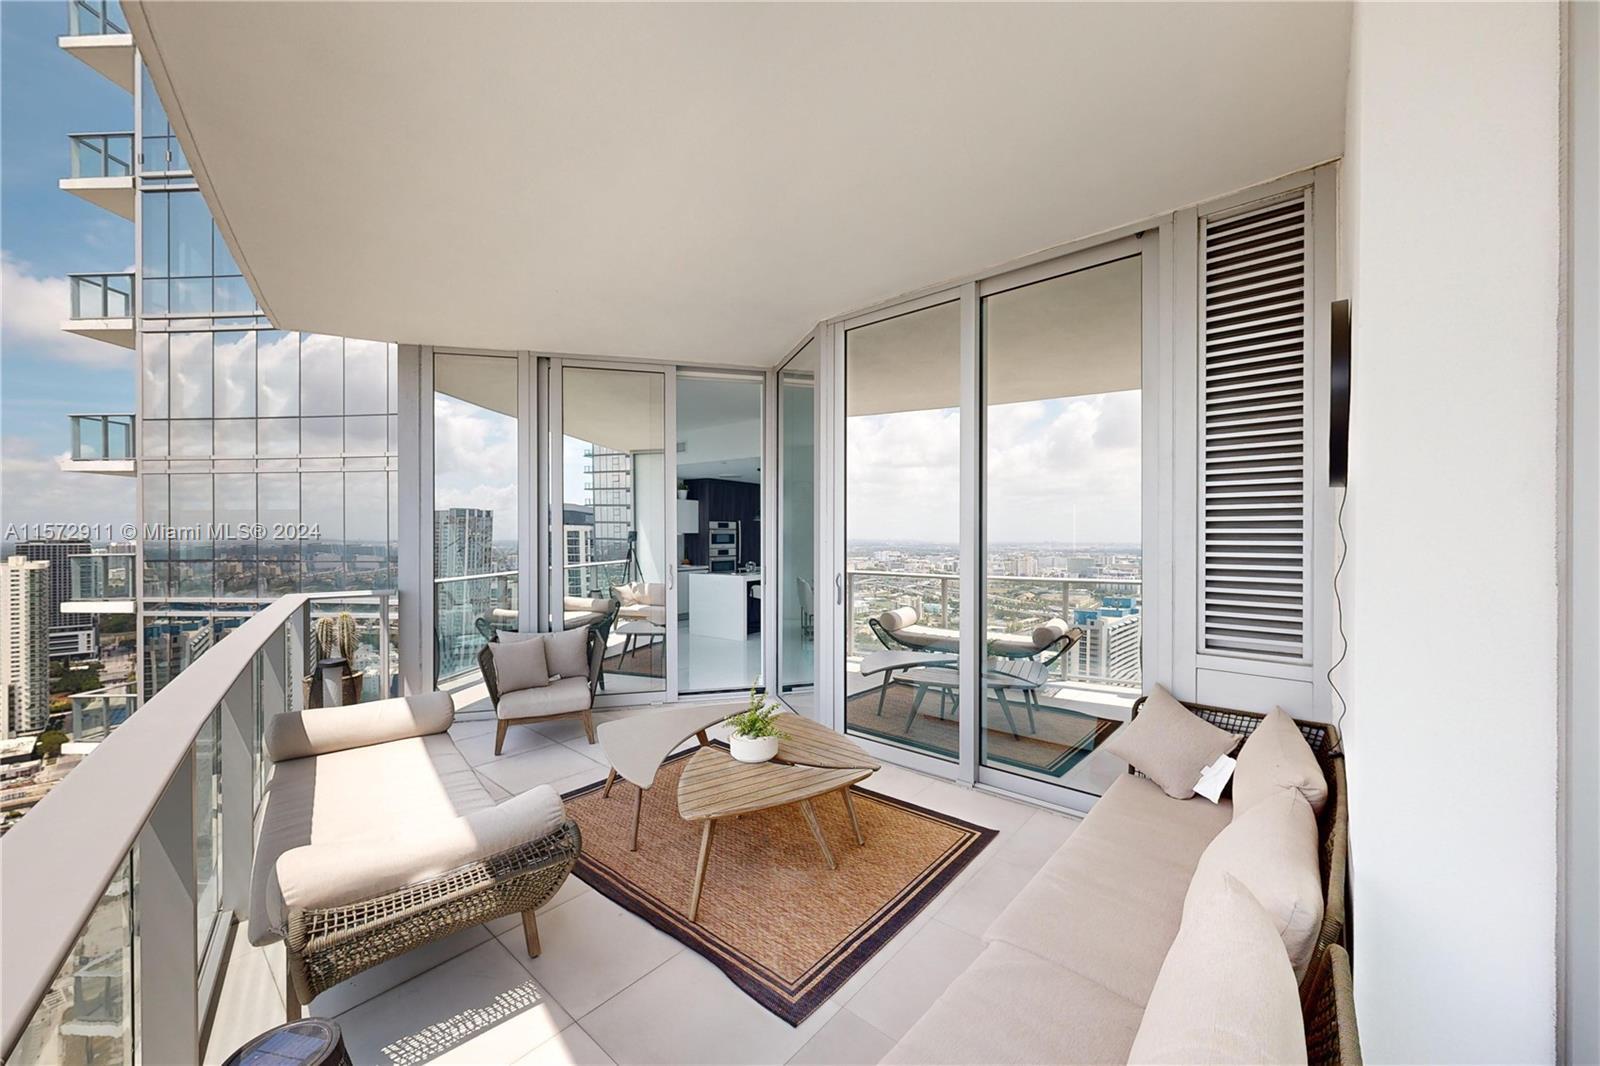 Discover unparalleled luxury living in the heart of Miami at this exquisite 1-bedroom, 1.5-bathroom 